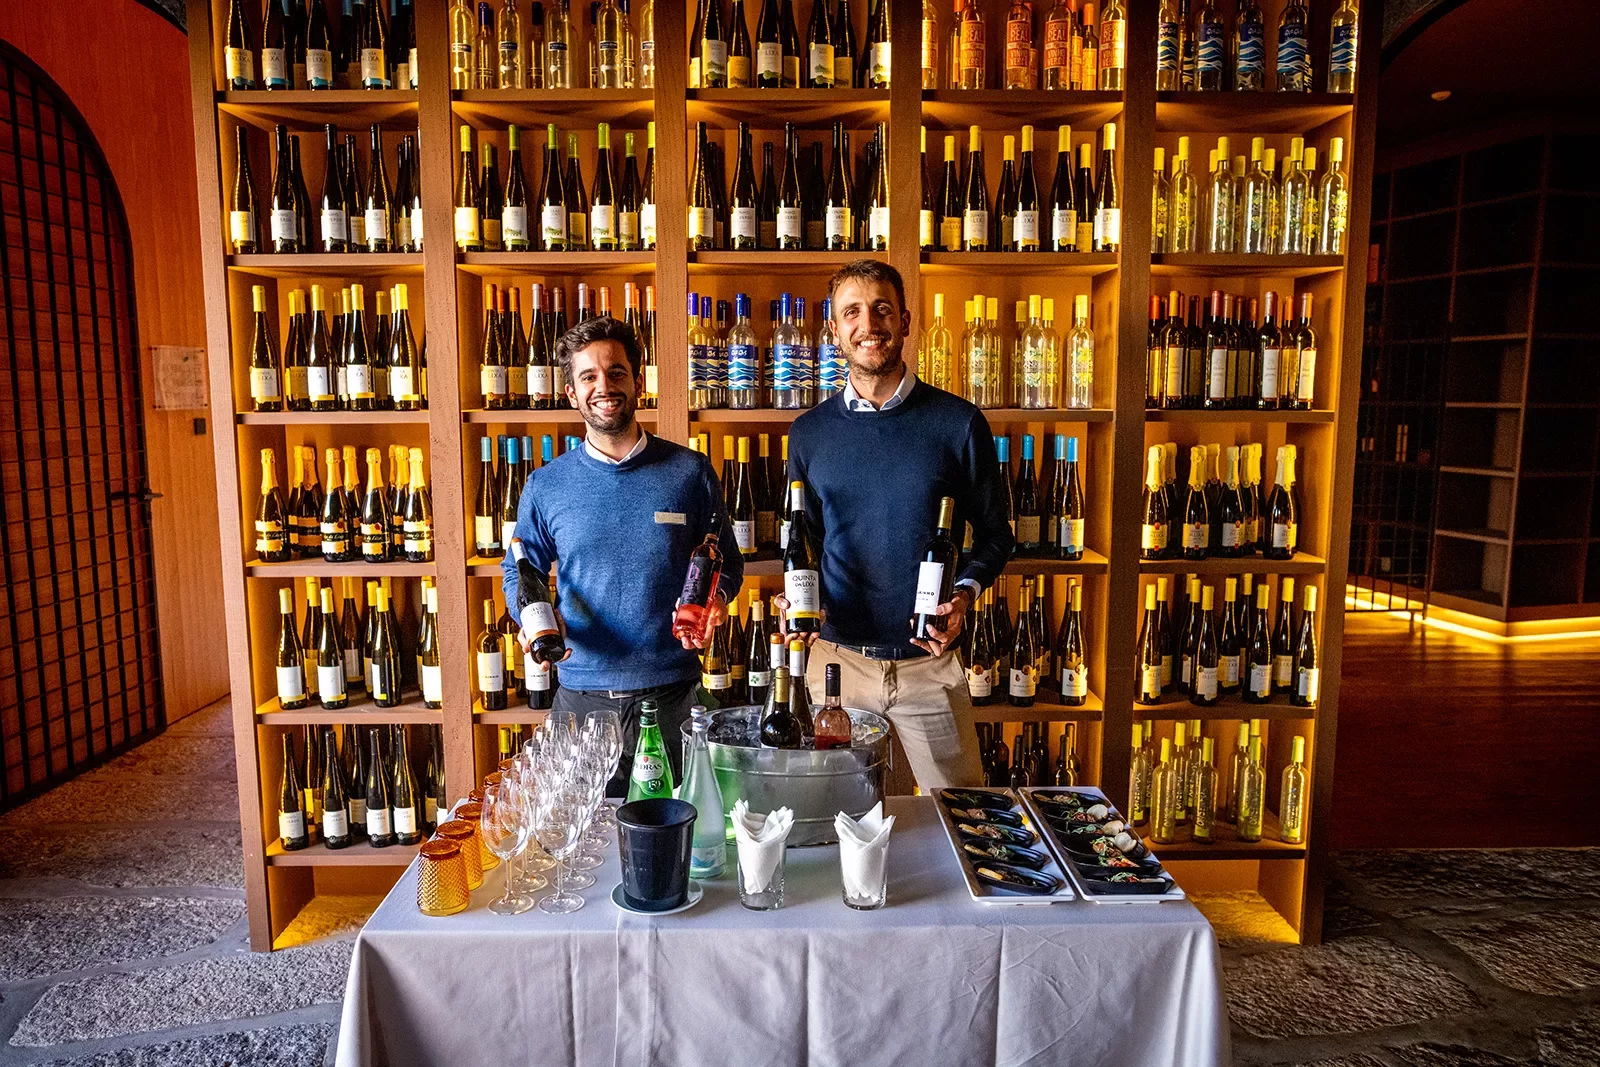 Two local wine sellers, wall of bottles behind them, table in front.